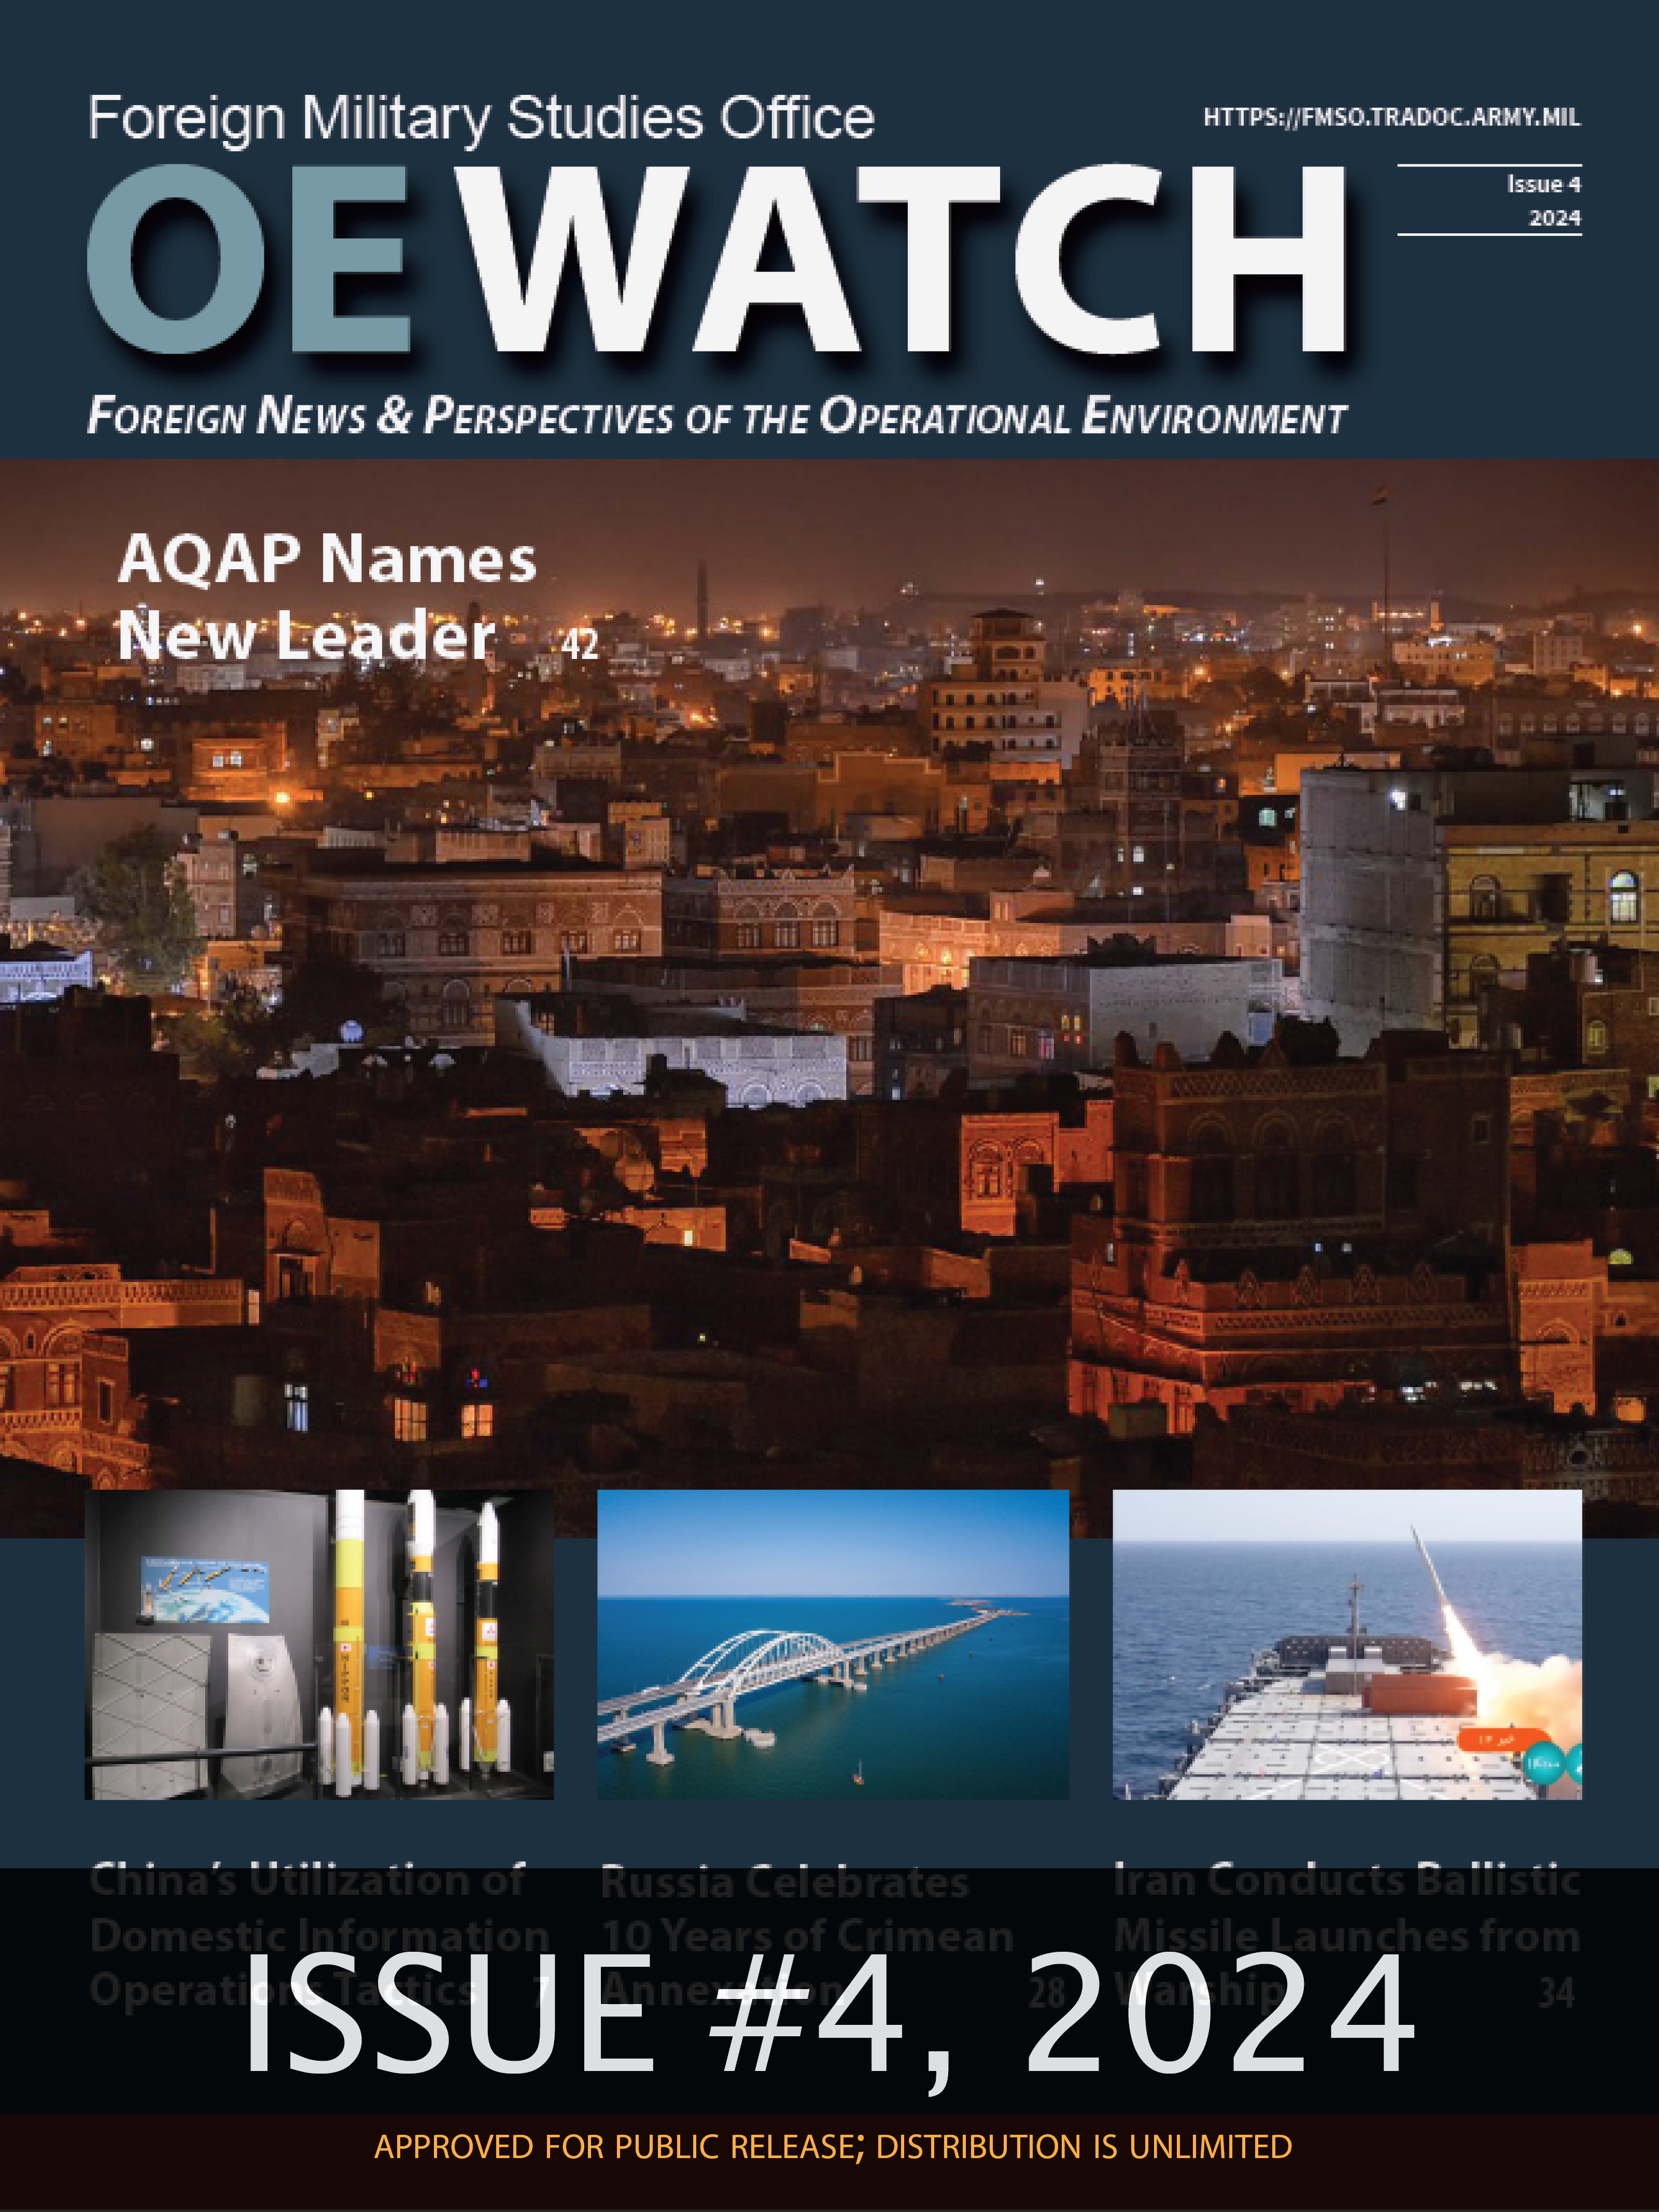 OE Watch, Vol 14, Issue 01, 2024; click image to download magazine